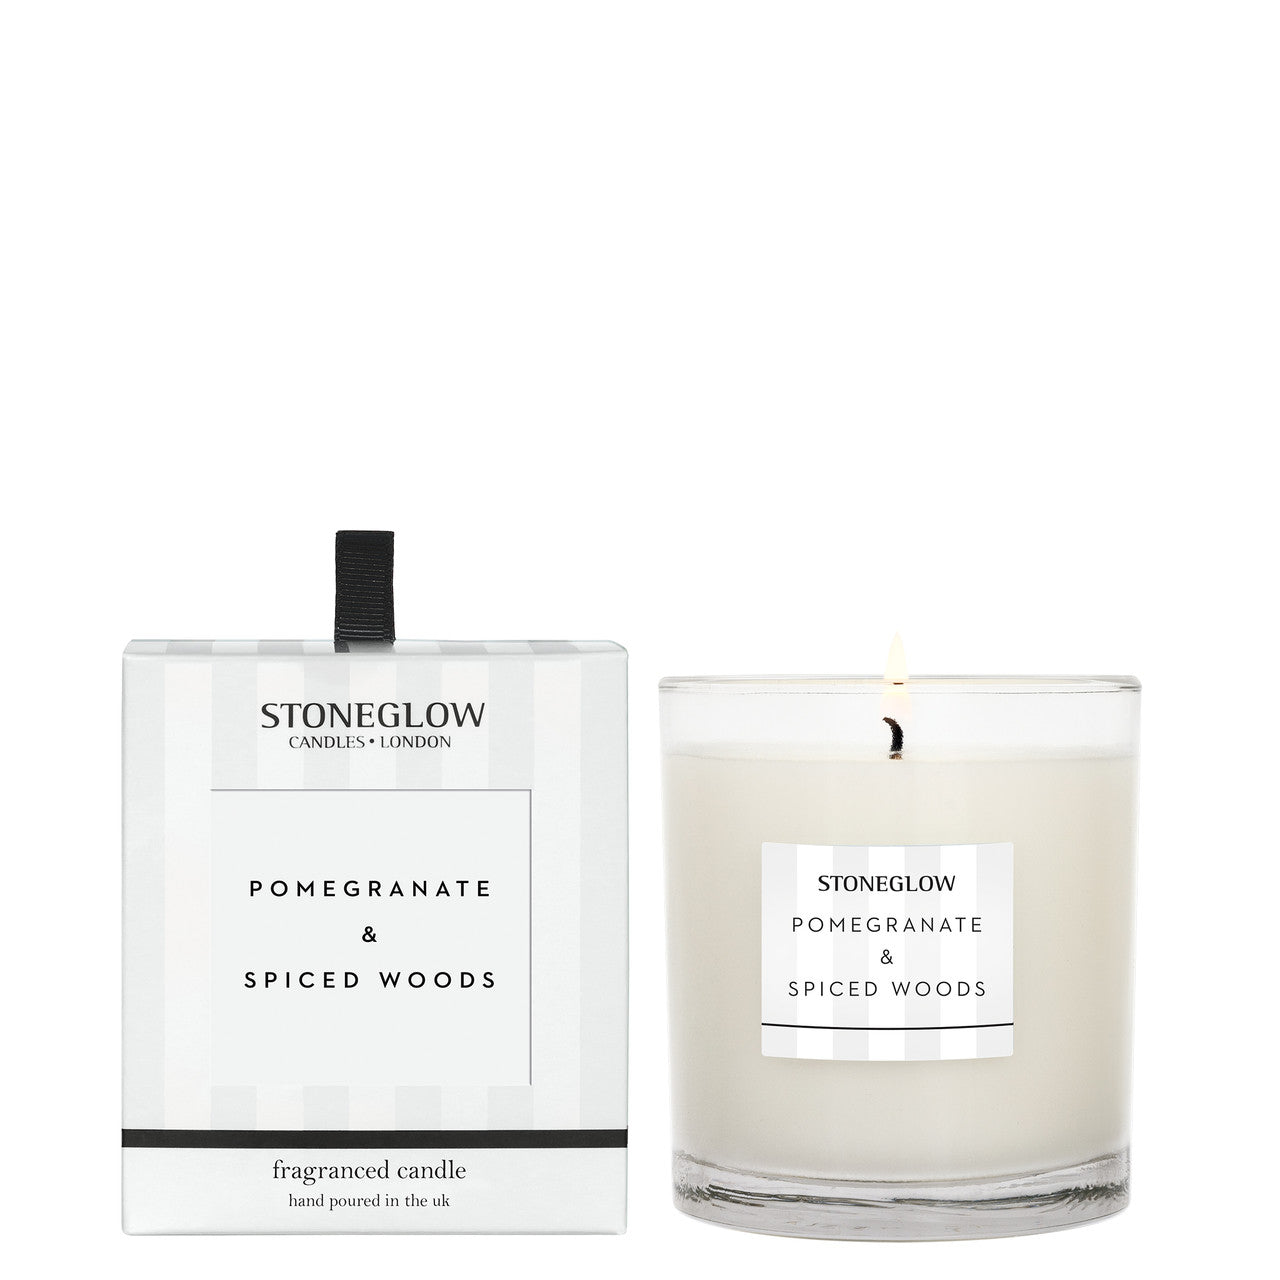 STONEGLOW - POMEGRANATE & SPICED WOODS - FRAGRANCED CANDLE